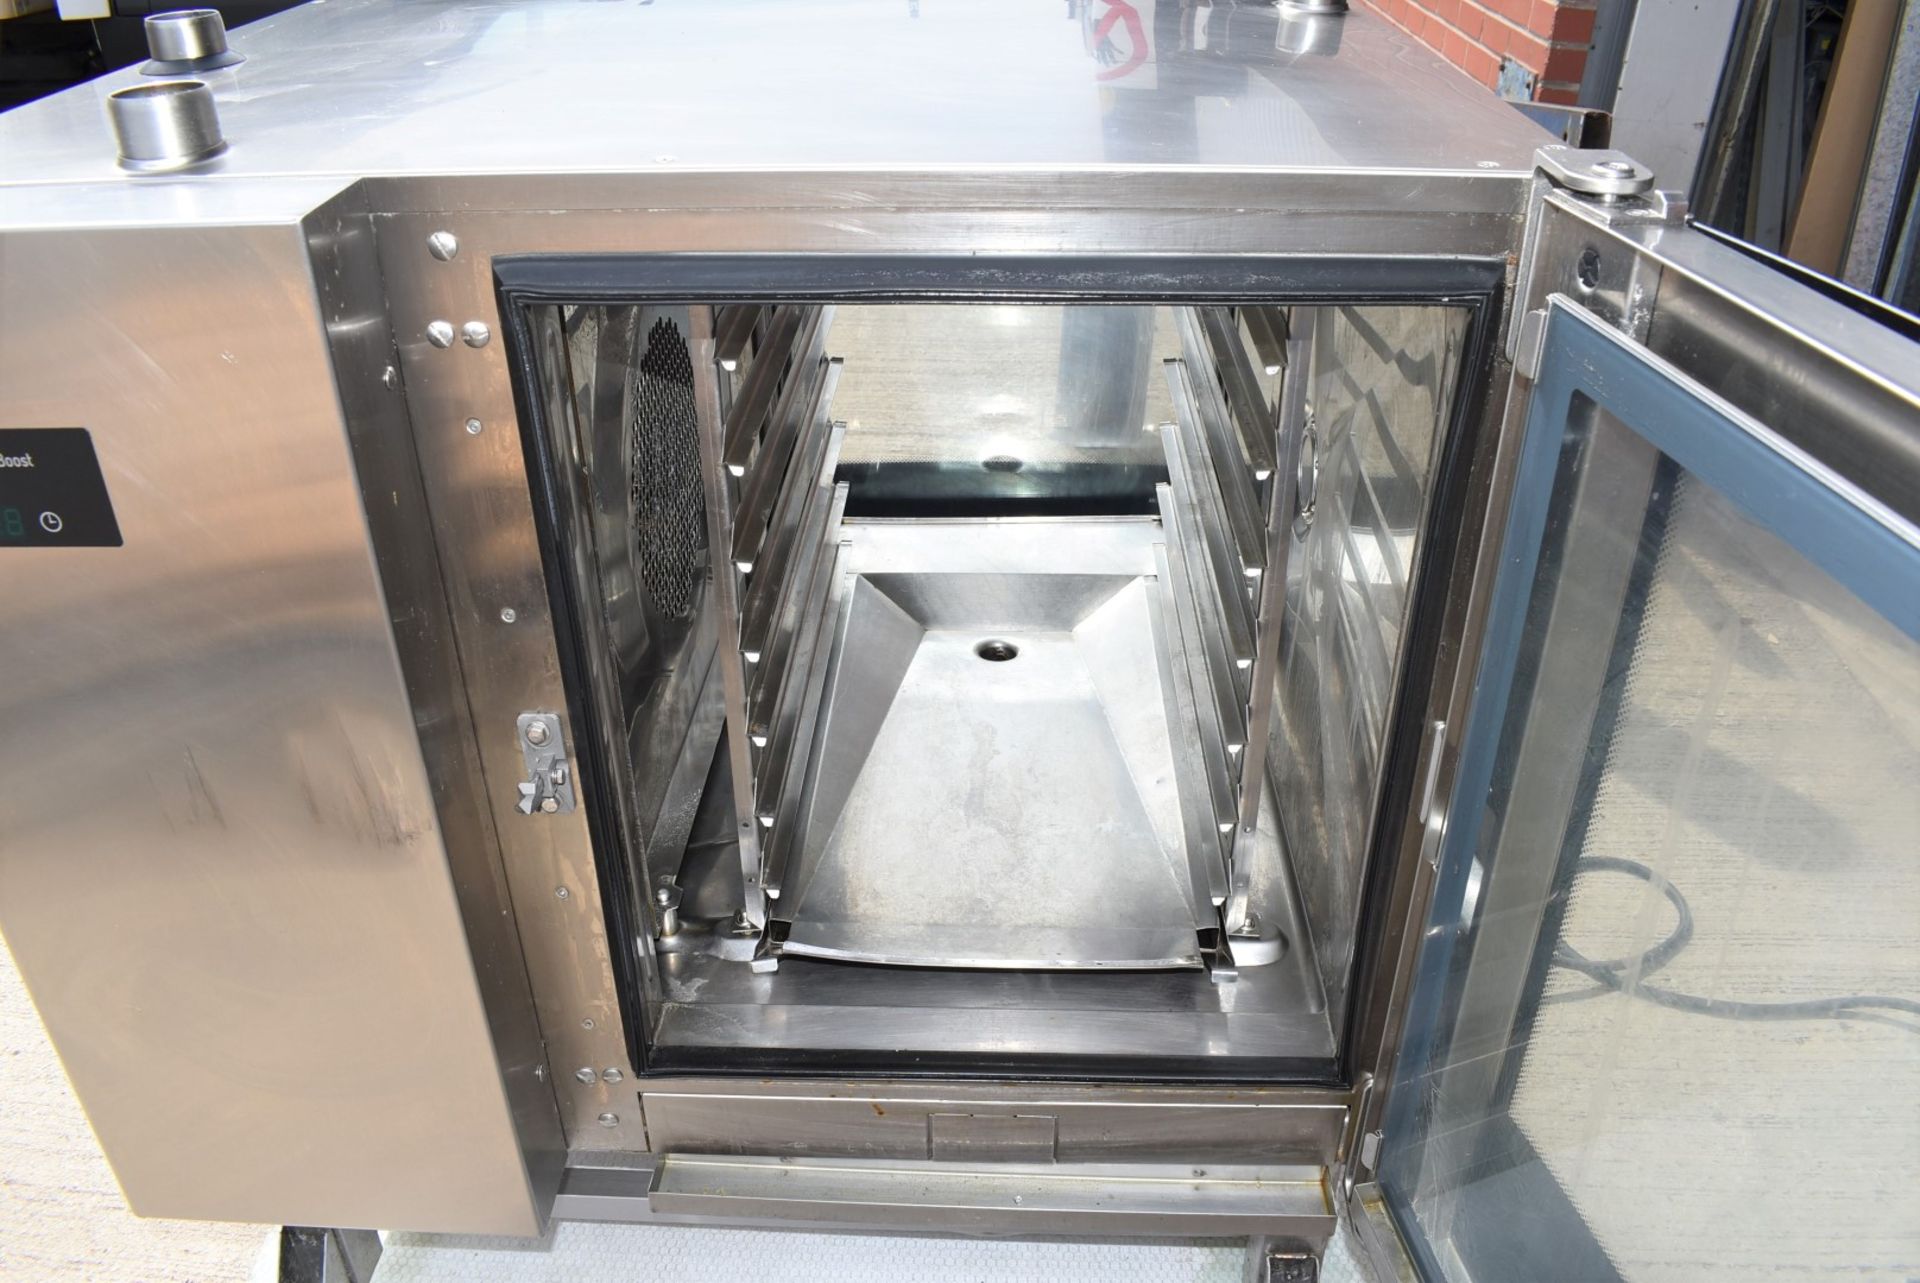 1 x Houno 6 Grid Electric Passthrough Door Combi Oven - 3 Phase With Pre-Set Cooking Options - Image 9 of 17